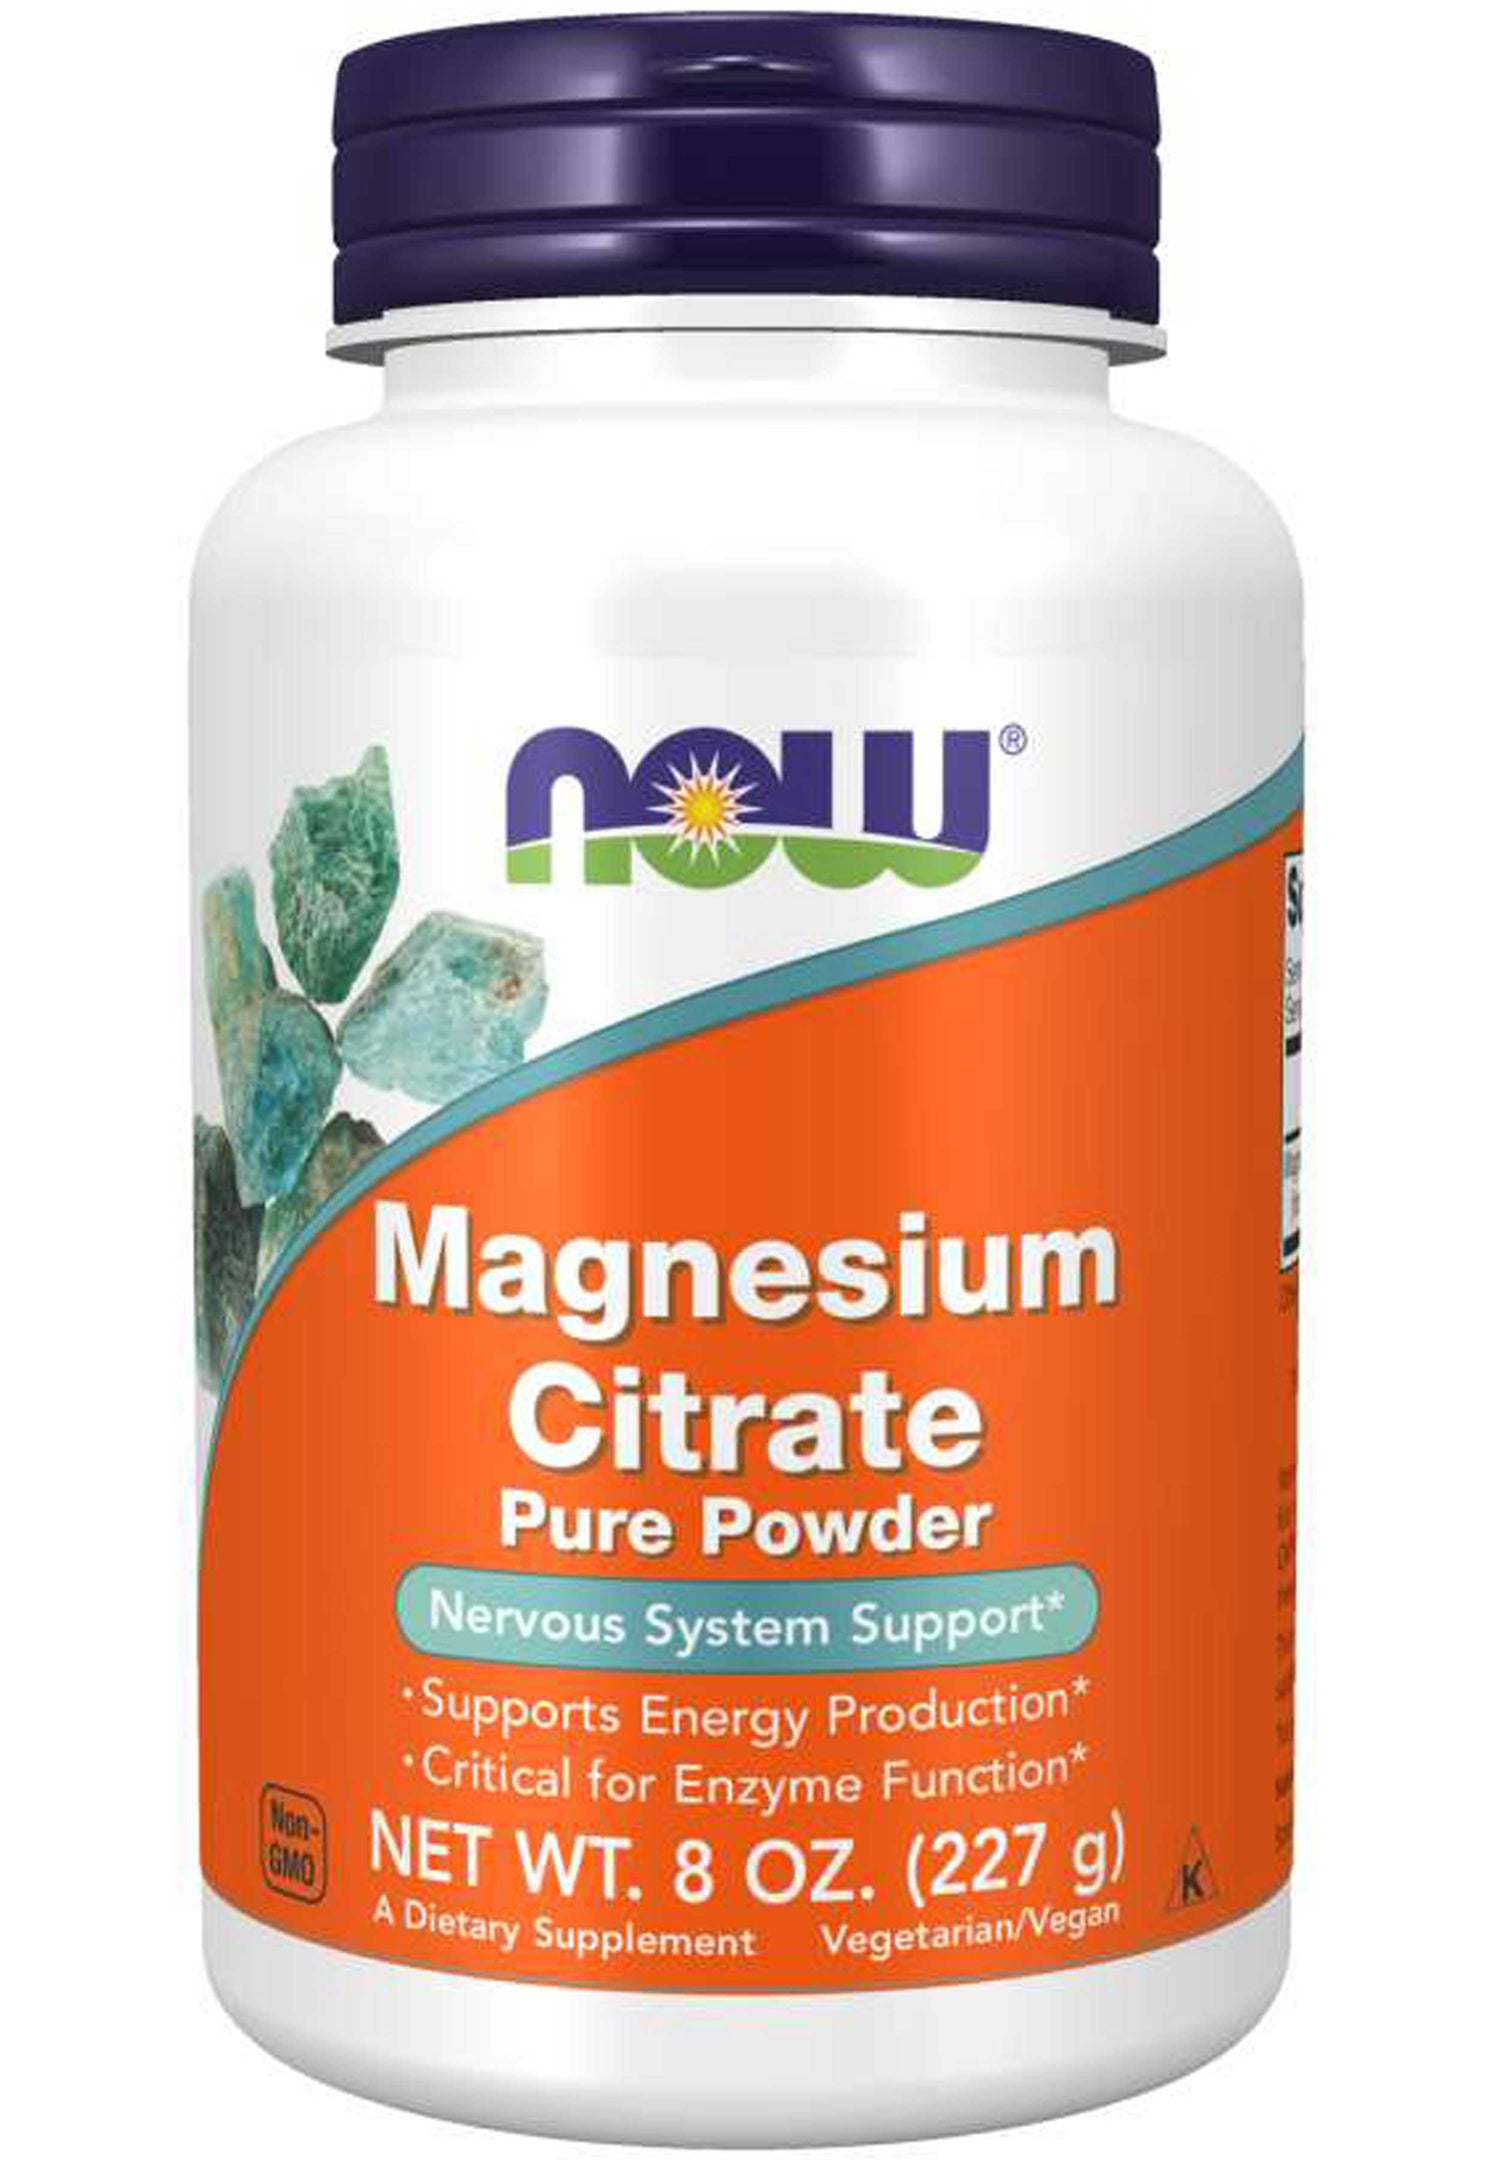 NOW Magnesium Citrate Pure Powder Supplement First